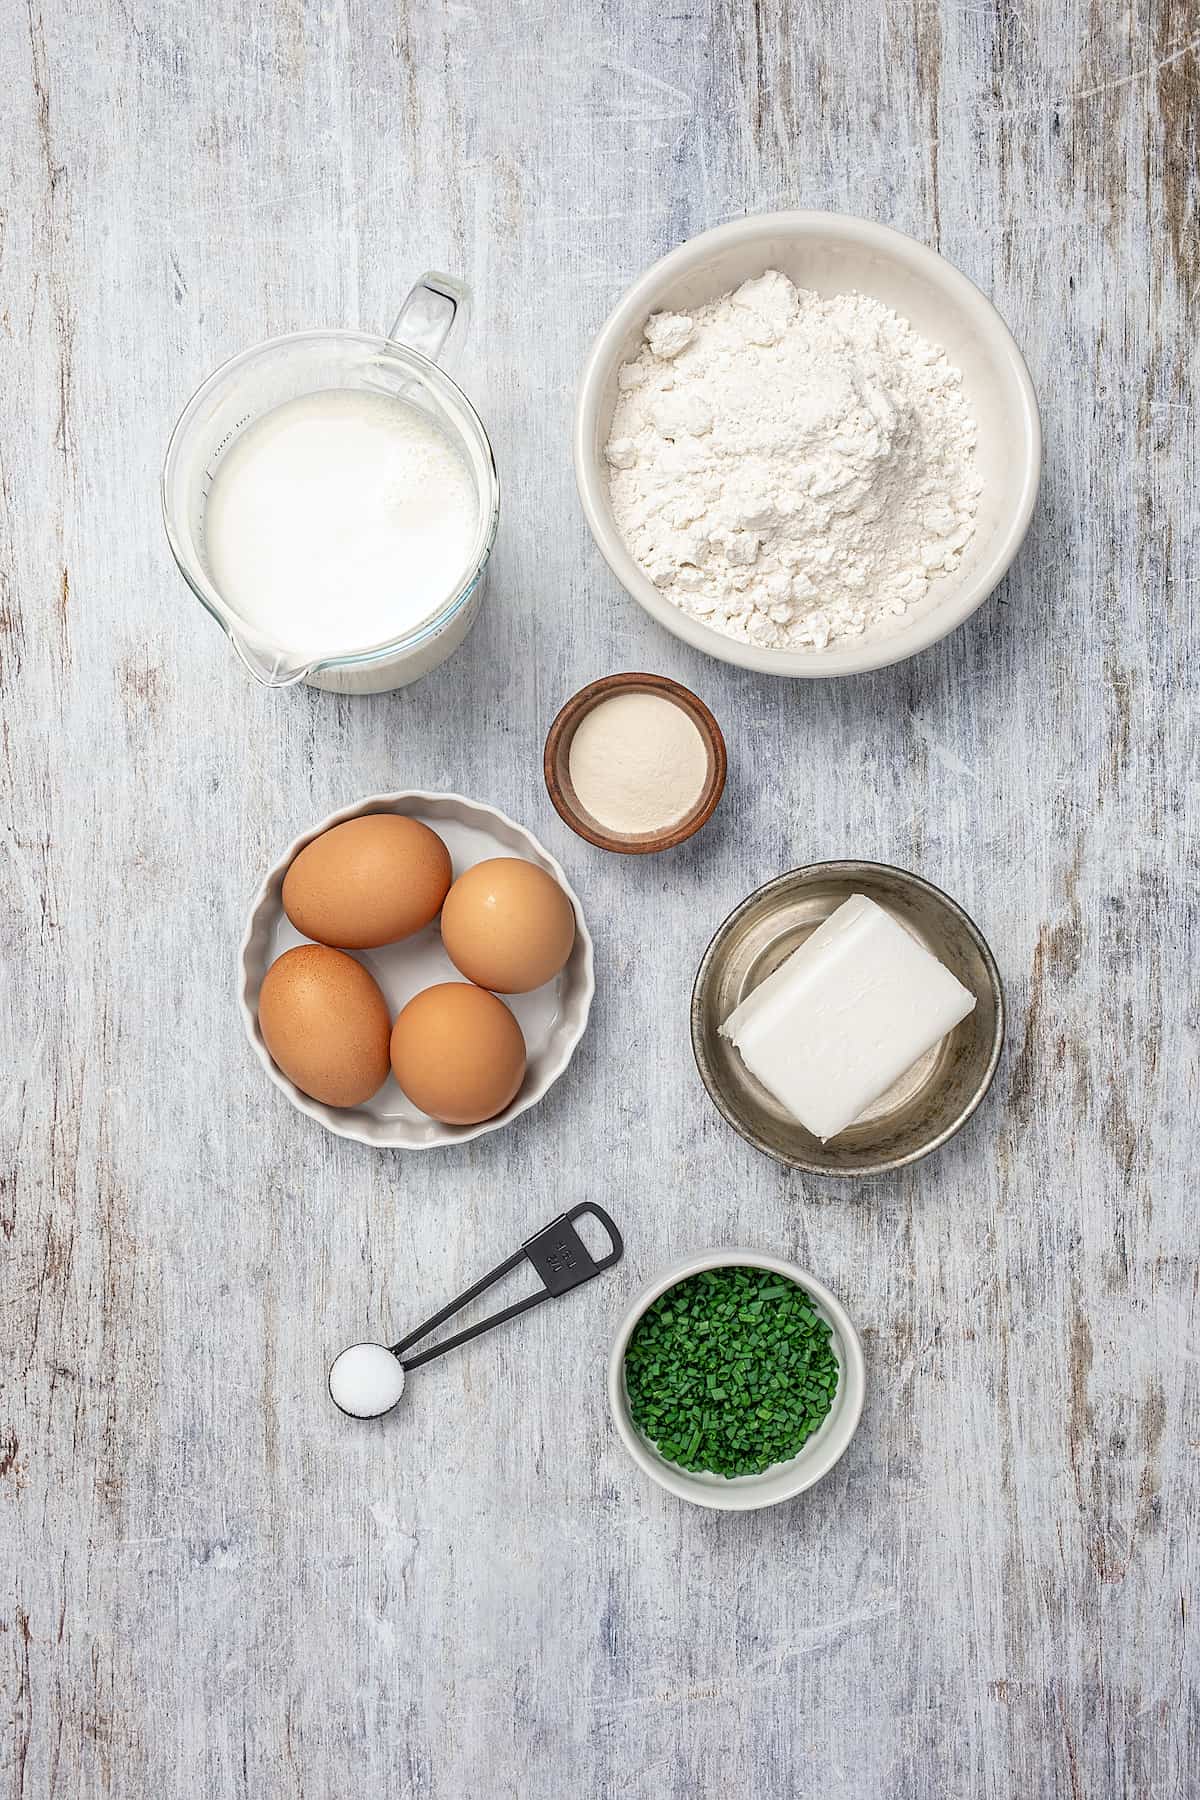 The ingredients for gluten-free Yorkshire pudding.